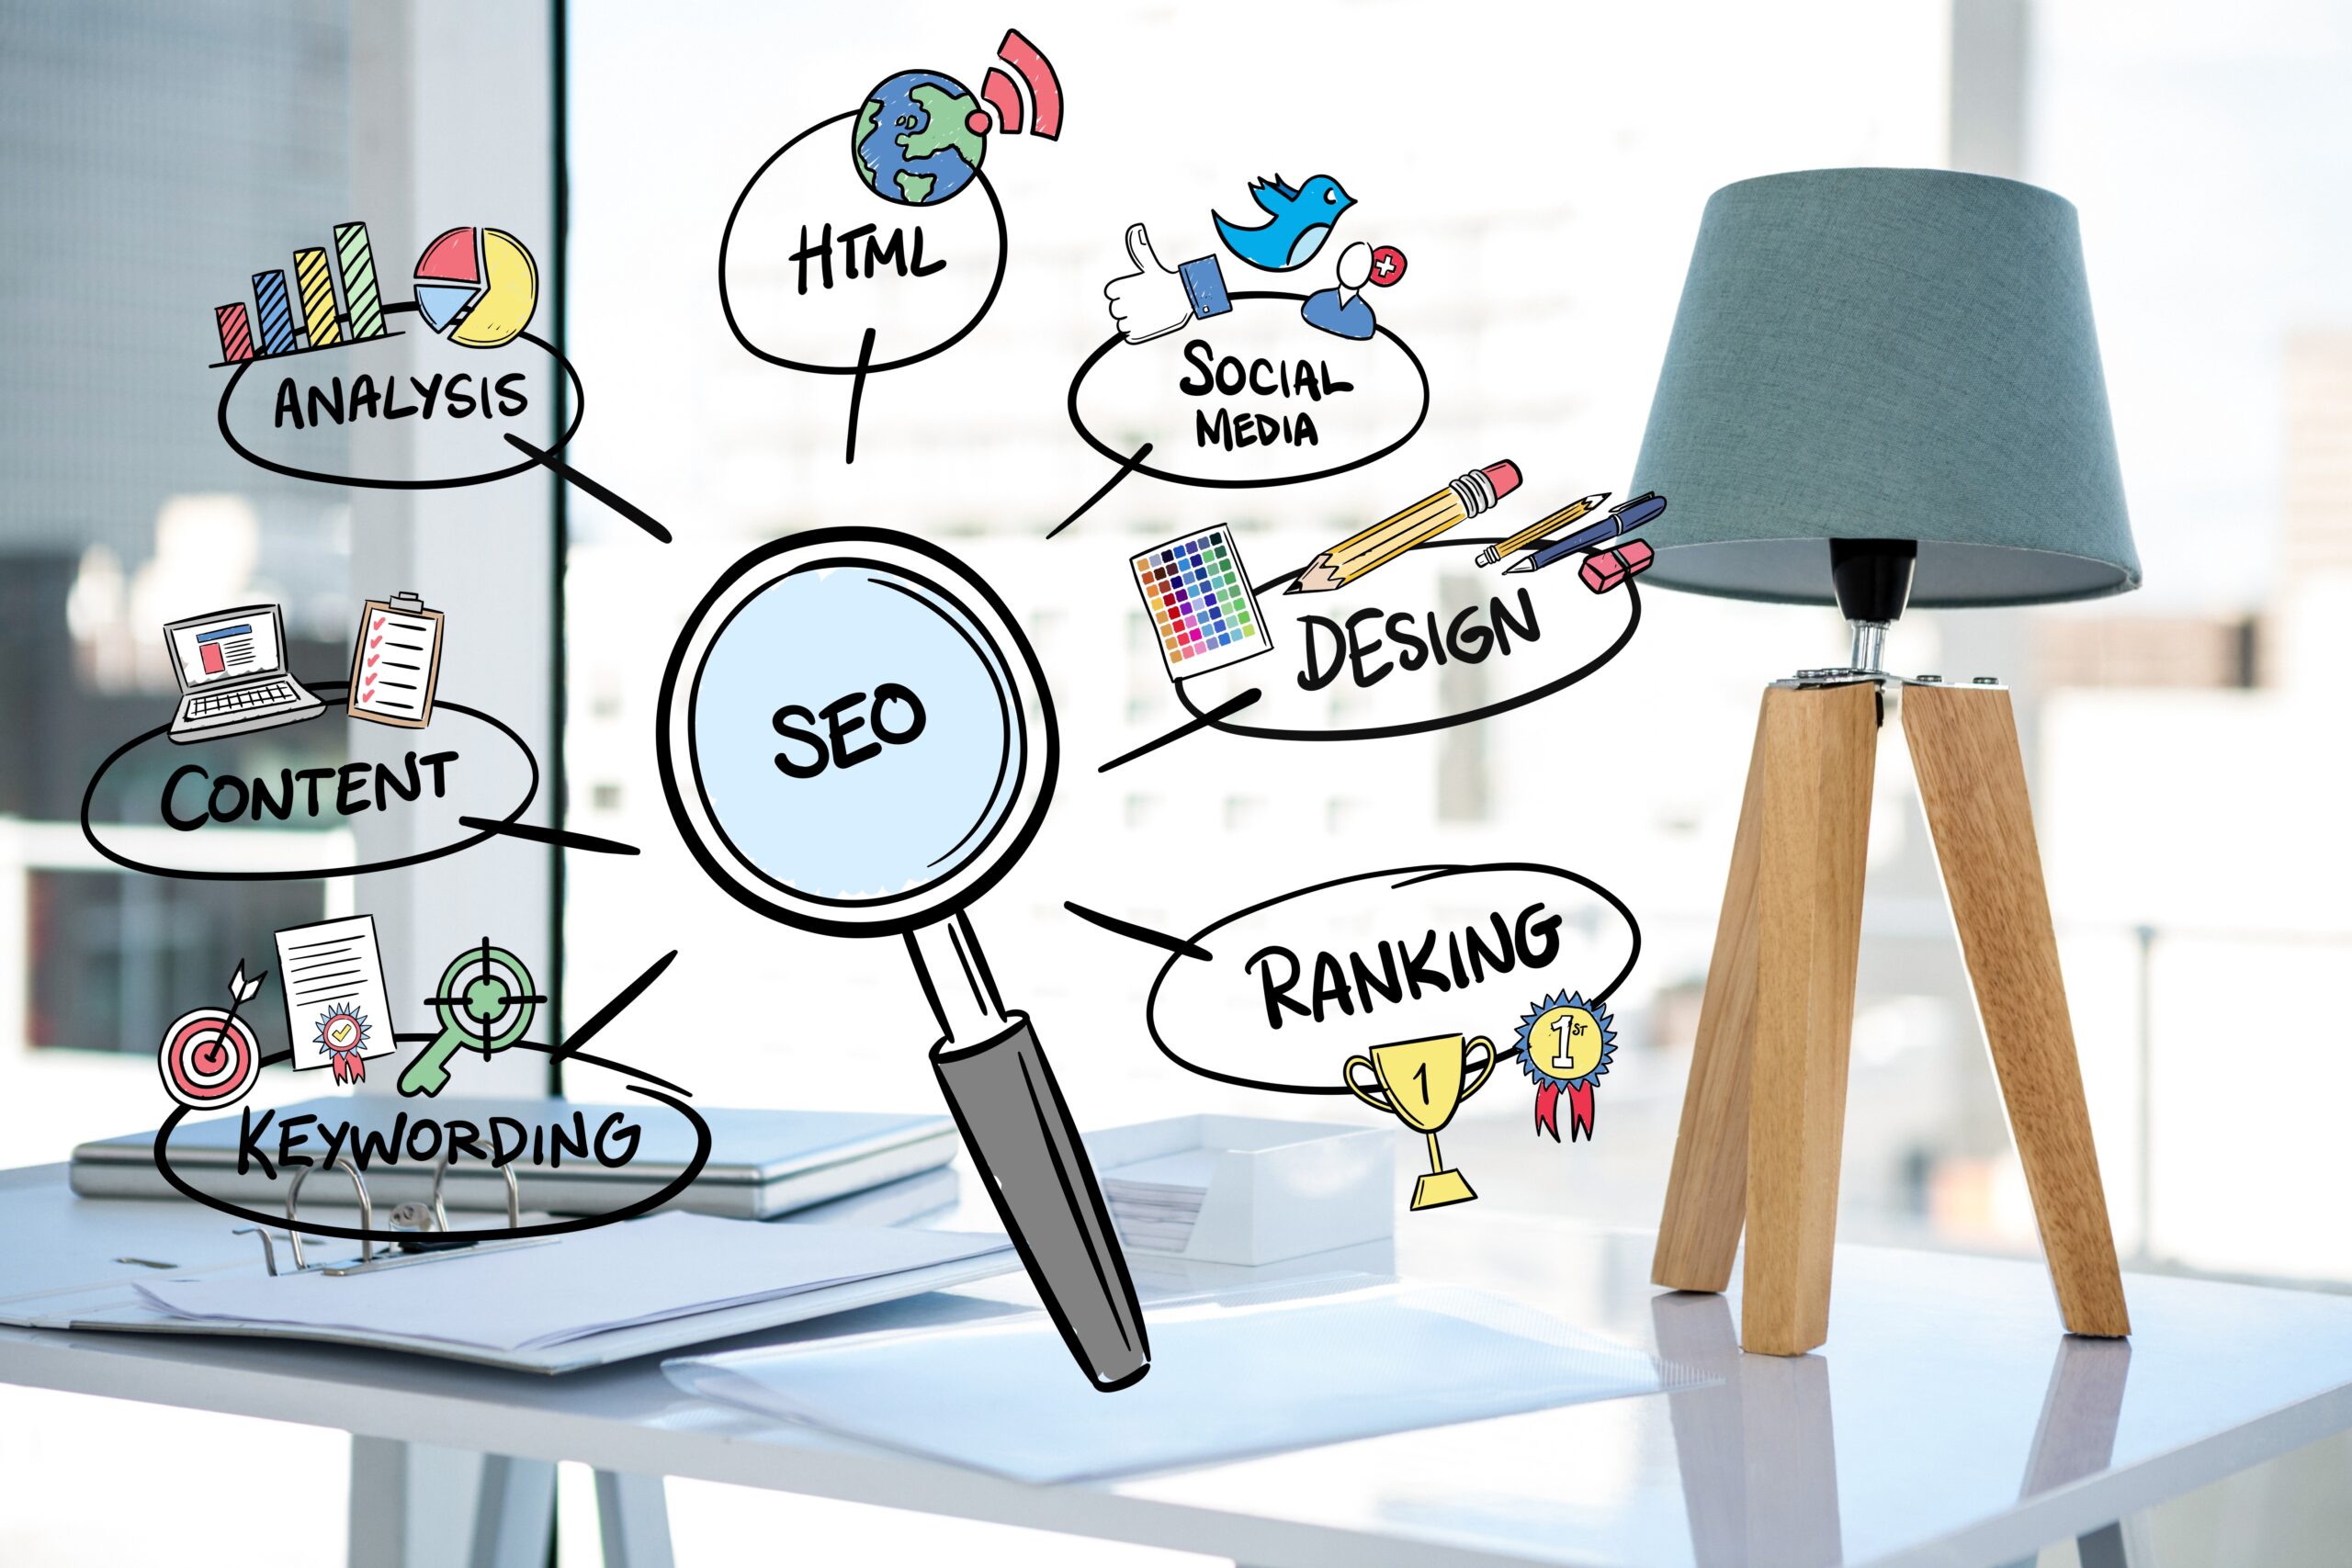 6 Things To Look For In An SEO Agency